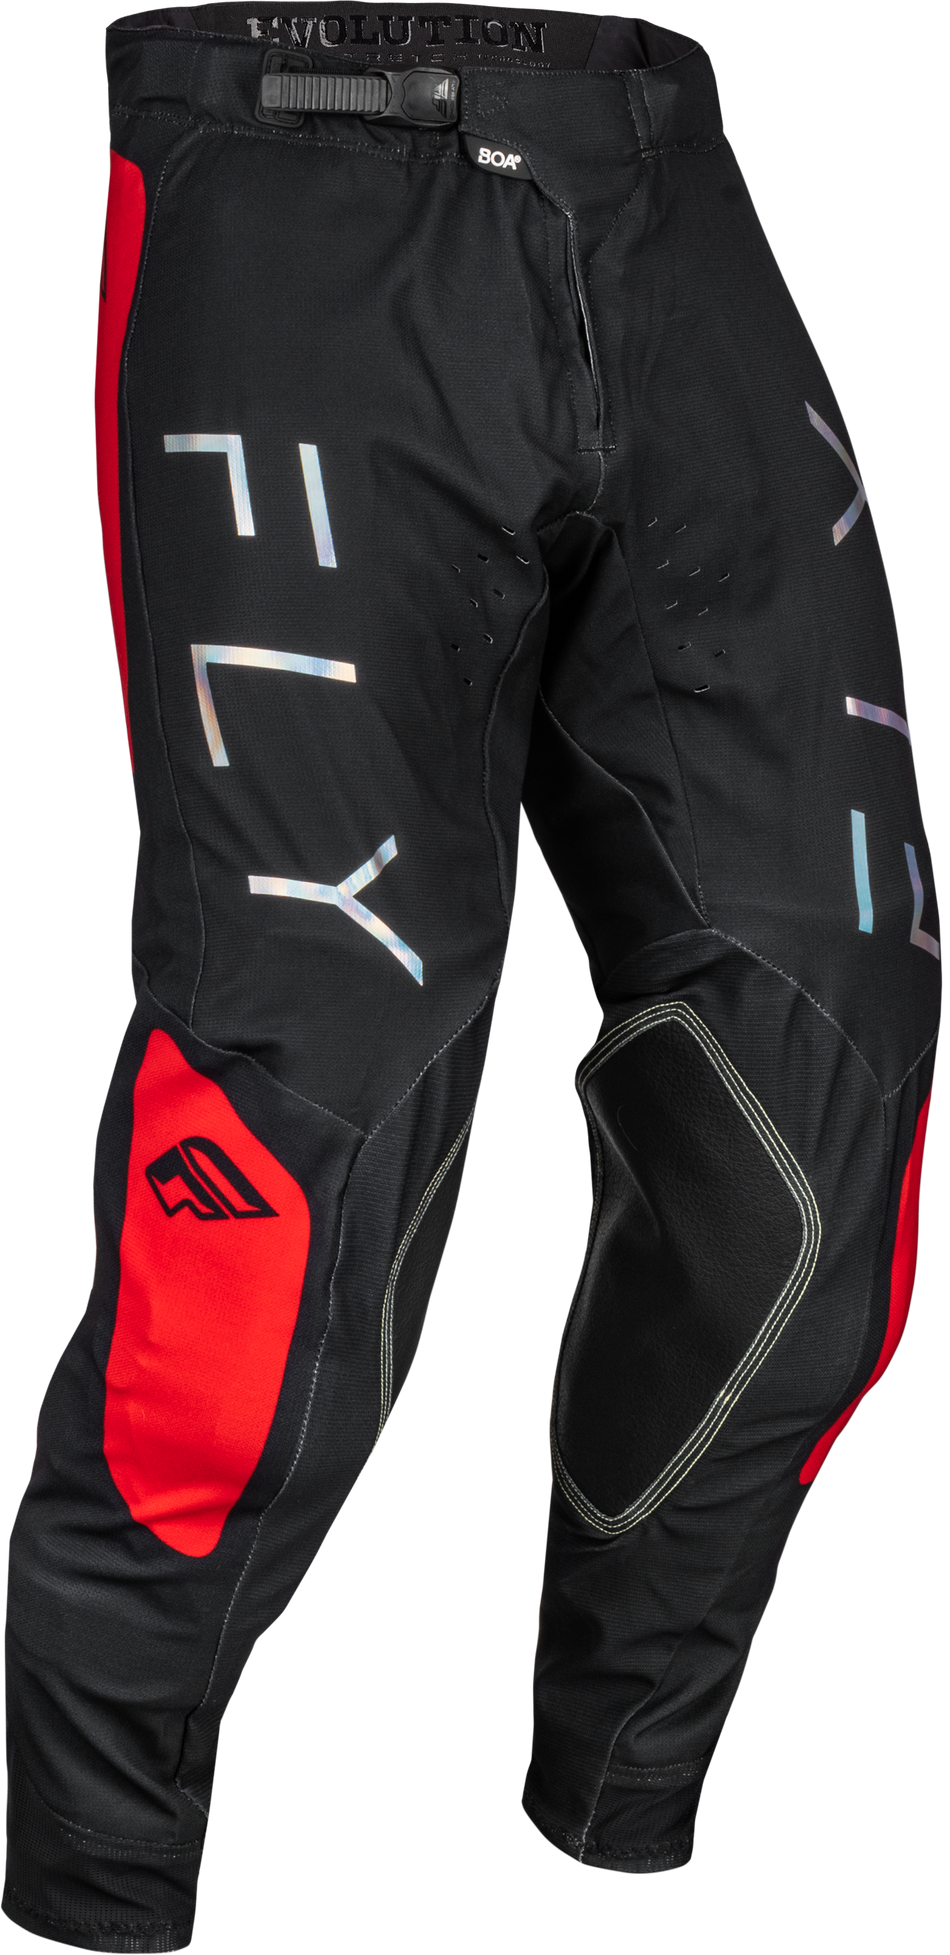 FLY RACING Evolution Dst Pants Black/Red Sz 36 377-13036